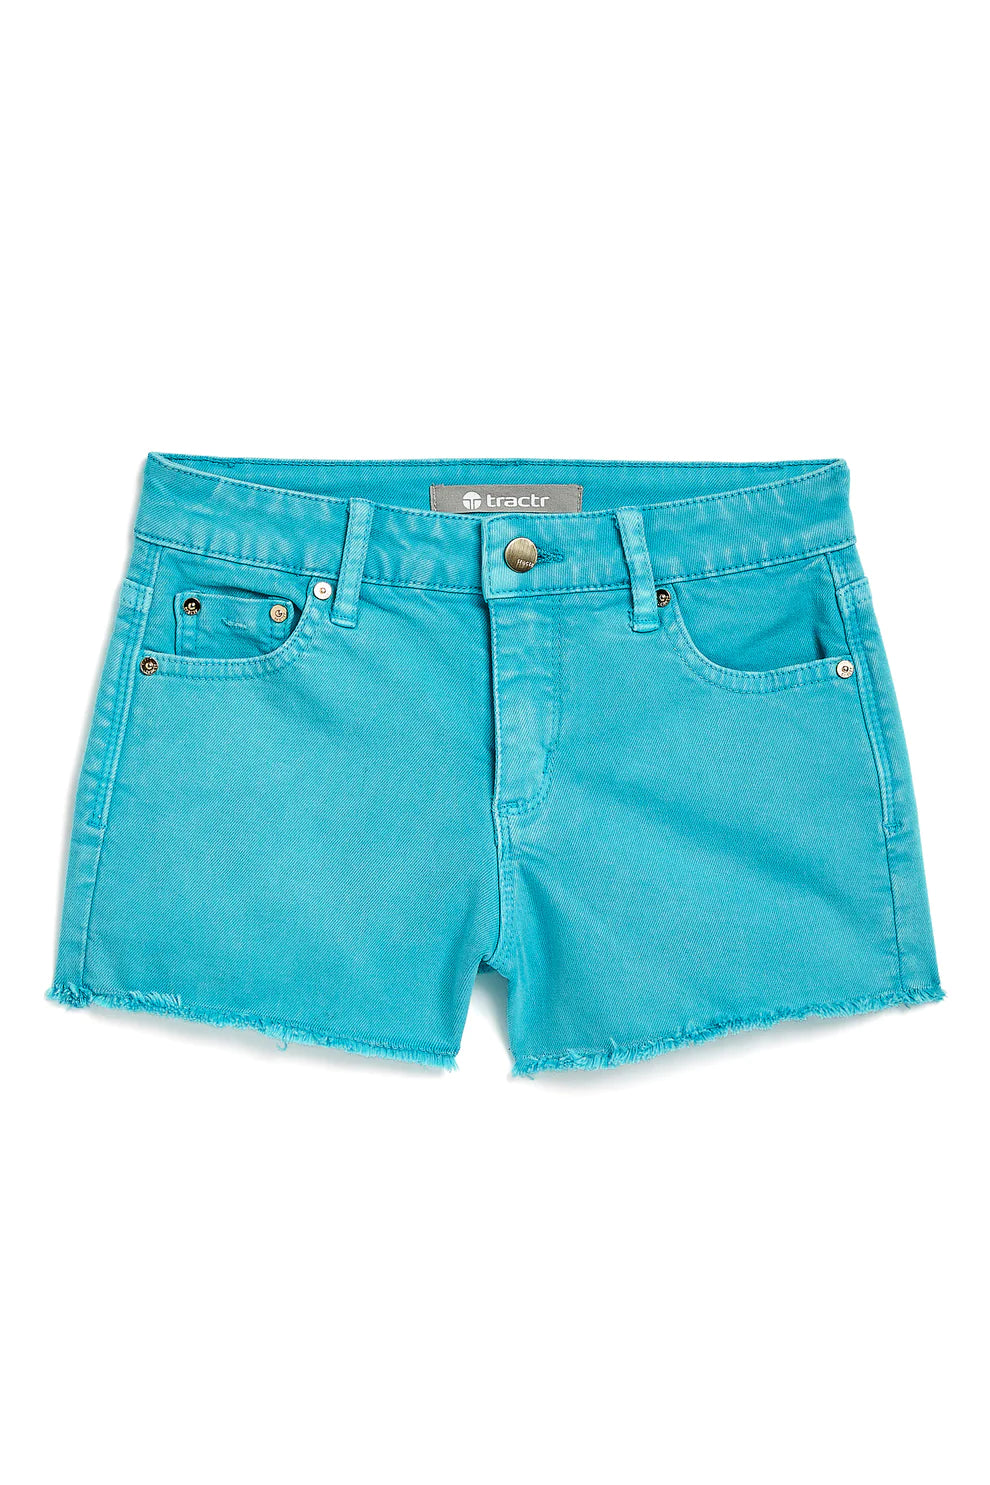 Tractr Brittany Shorts in Peacock Blue